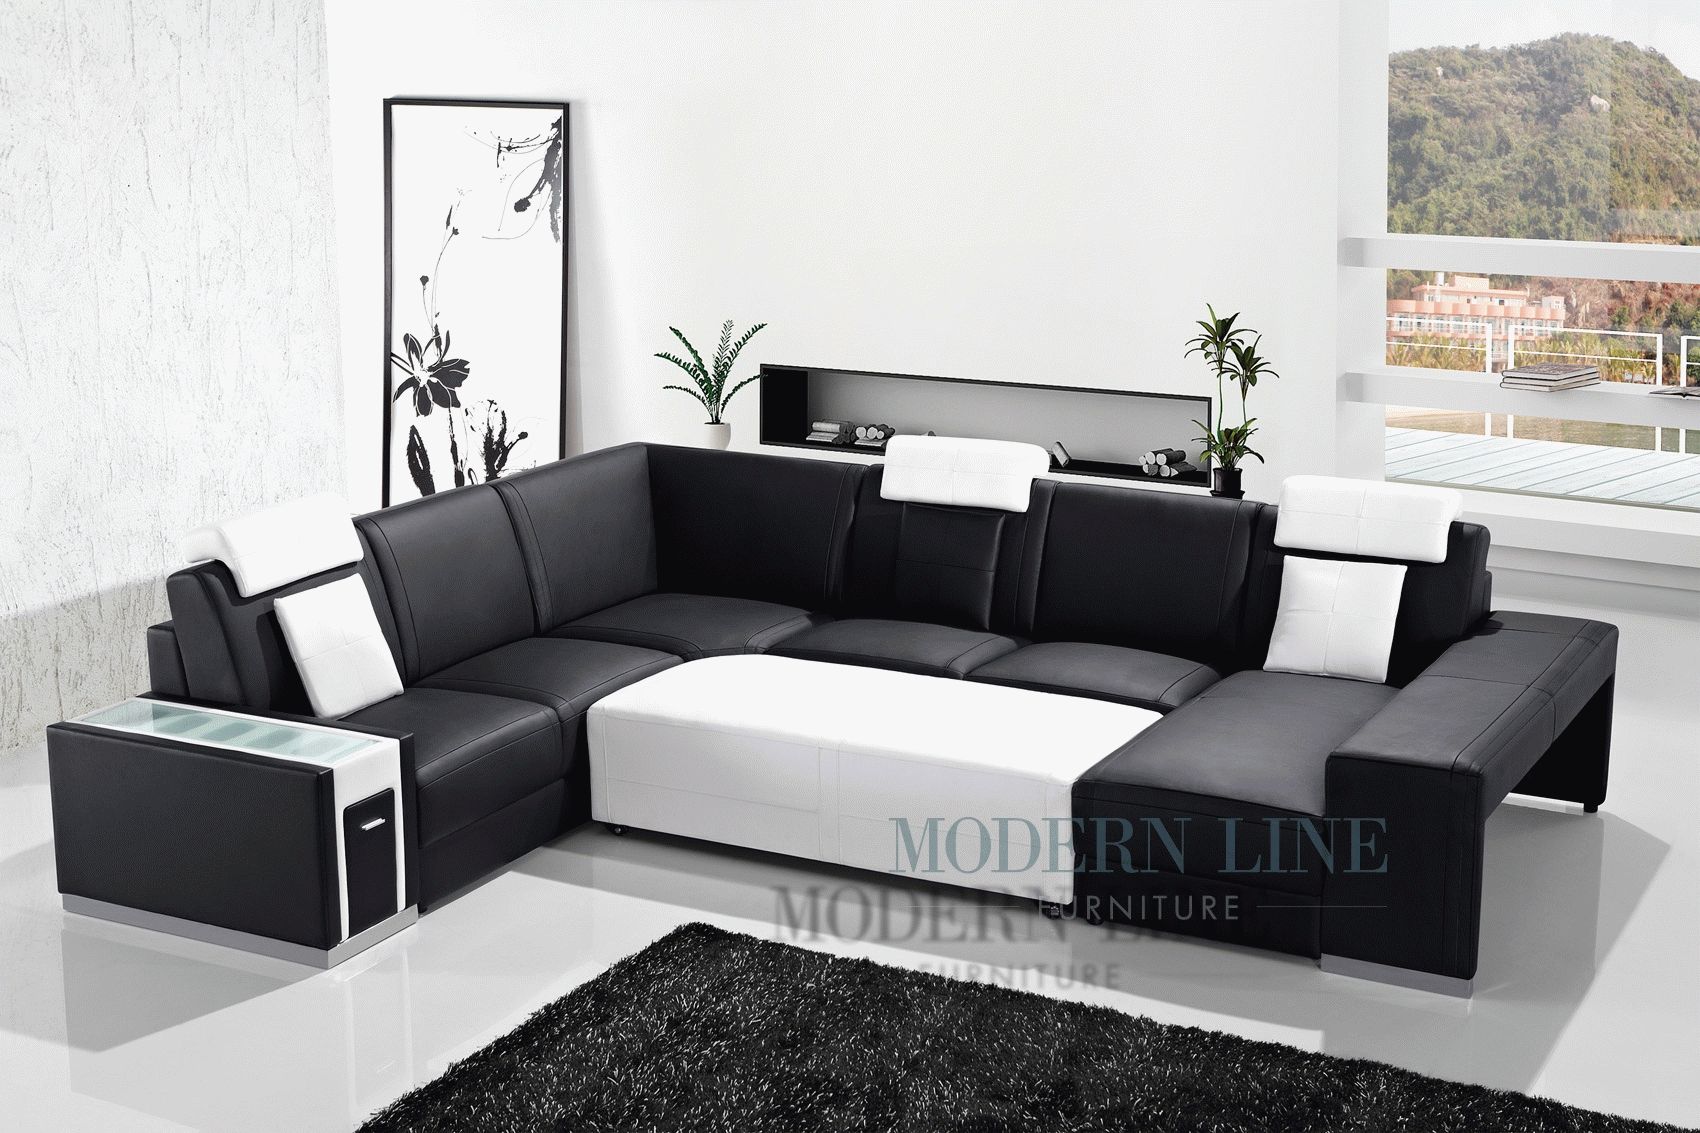 Large Sectional Sofa With Ottoman | Tehranmix Decoration In Sectional With Large Ottoman (View 6 of 20)